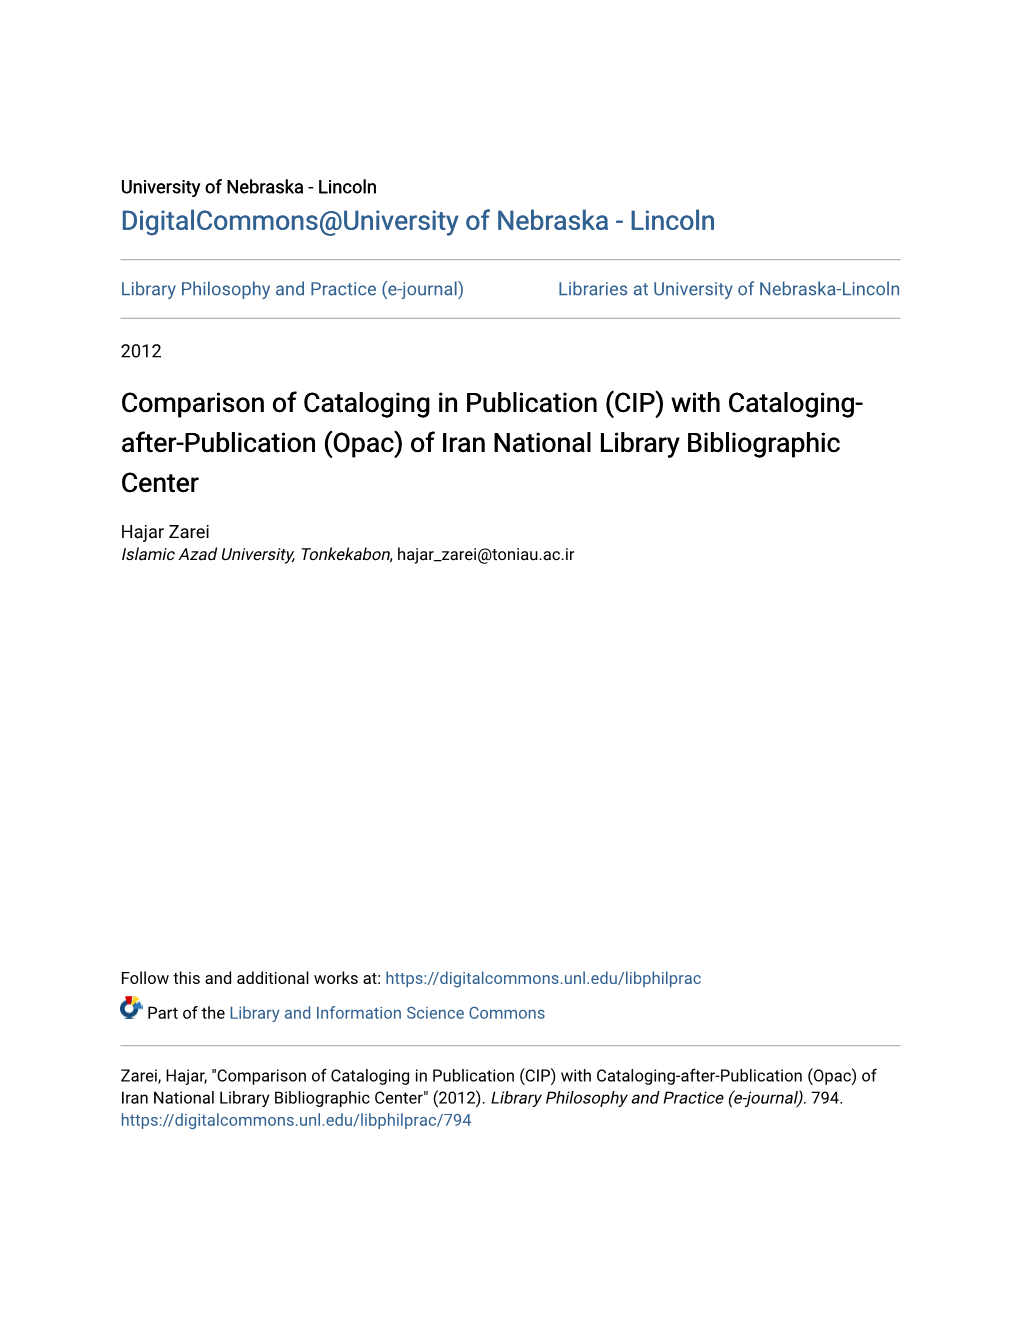 Comparison of Cataloging in Publication (CIP) with Cataloging-After-Publication (Opac) of Iran National Library Bibliographic Center" (2012)